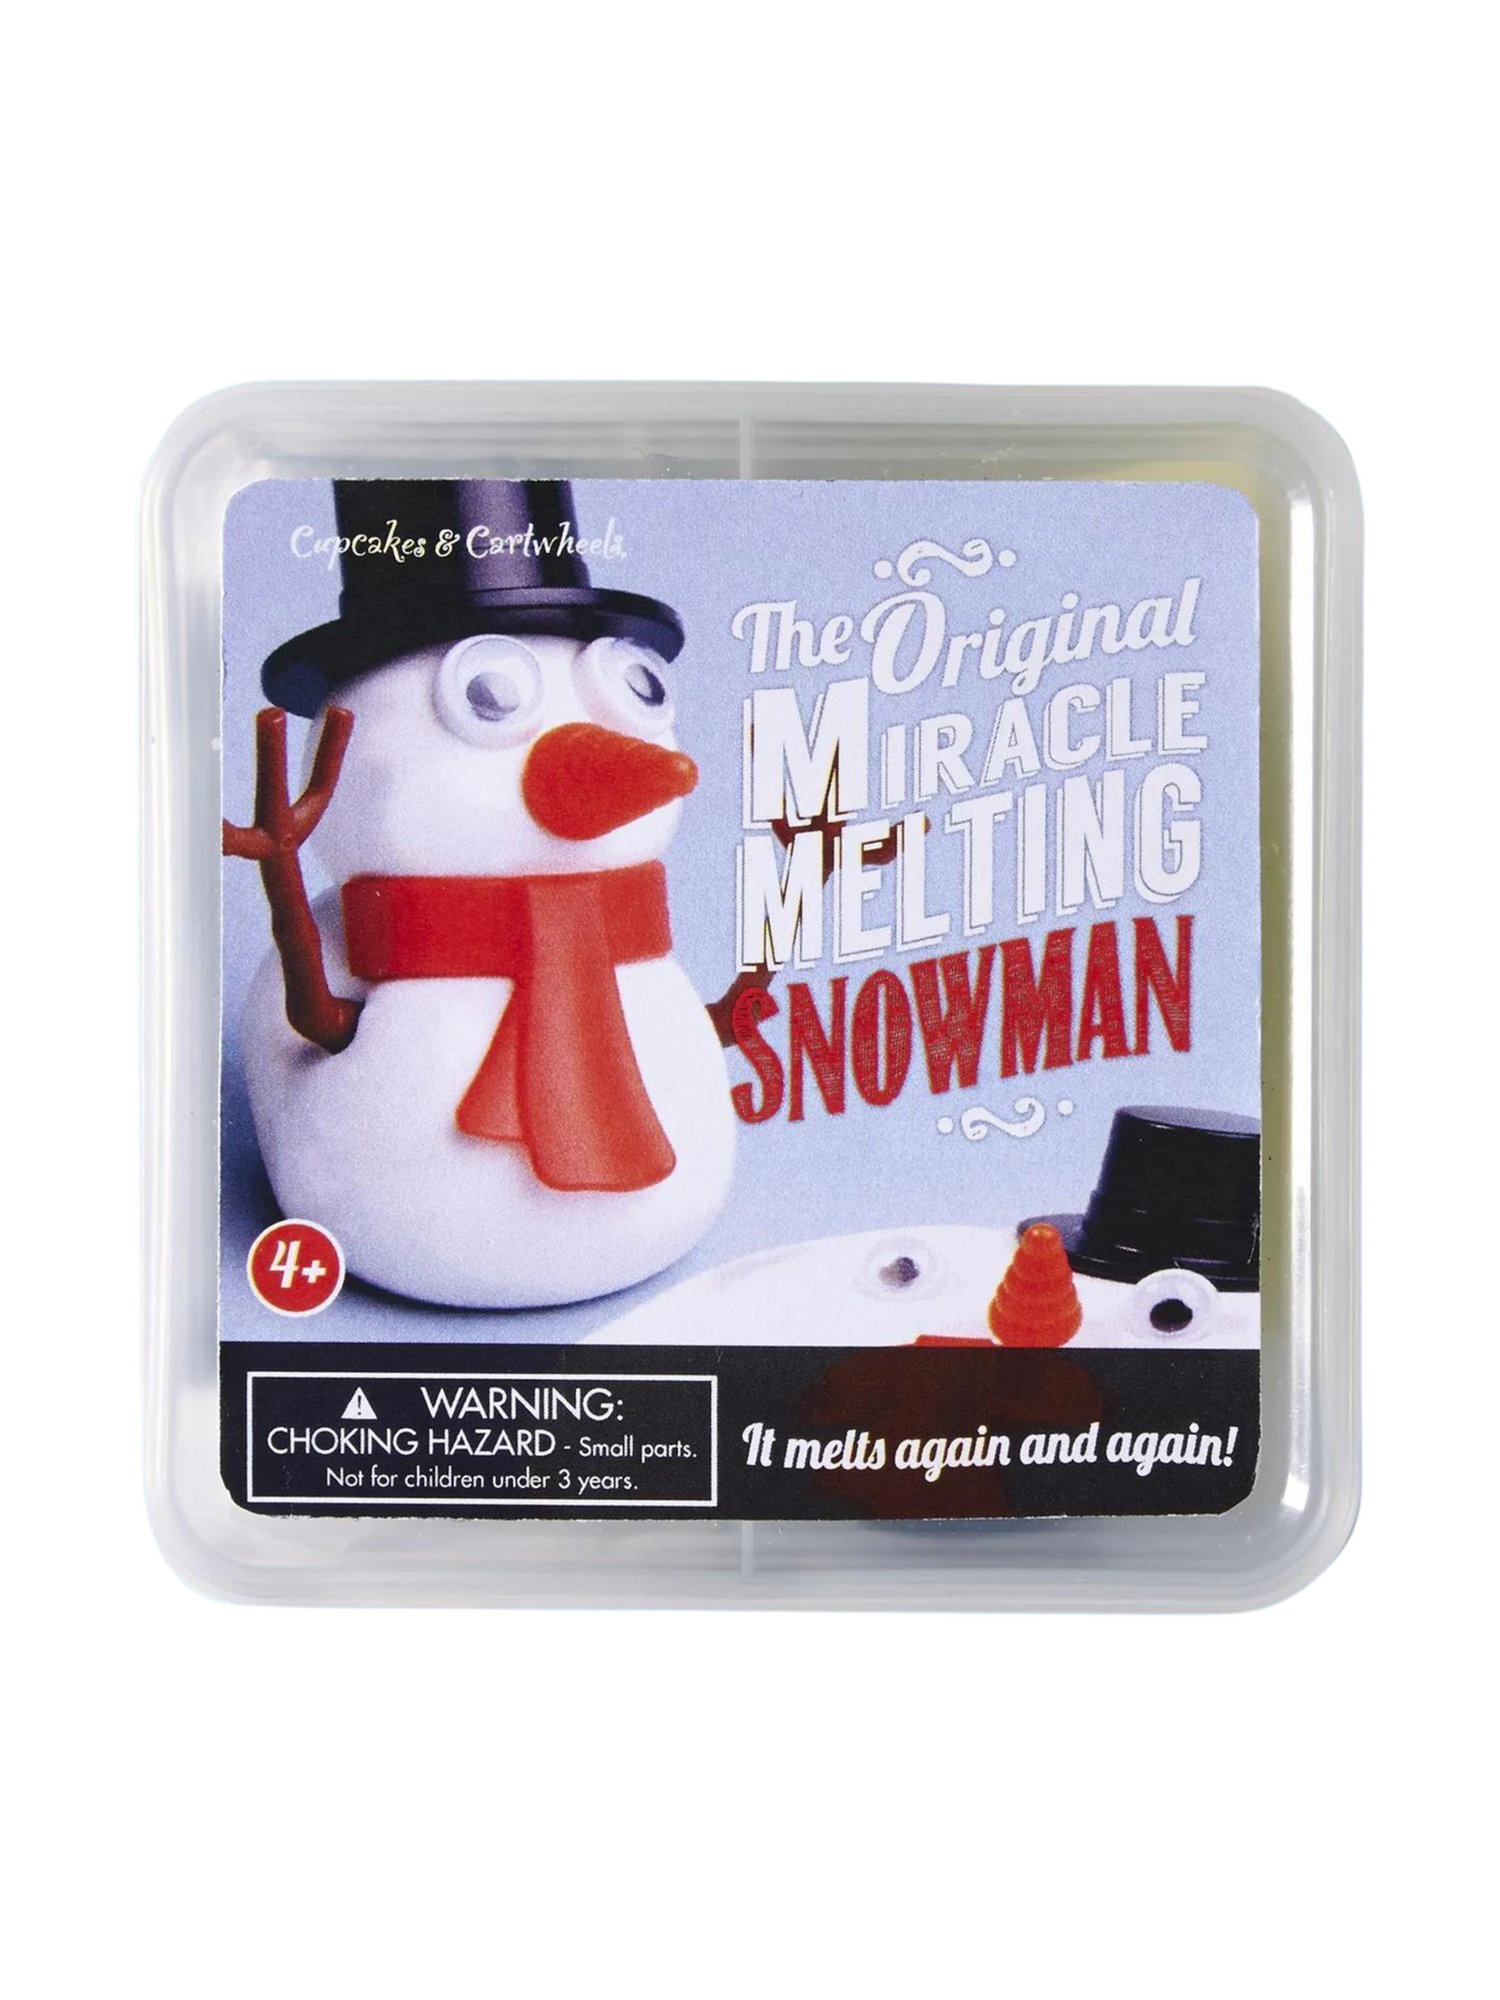 THE ORIGNIAL MIRACLE MELTING SNOWMAN - THE HIP EAGLE BOUTIQUE